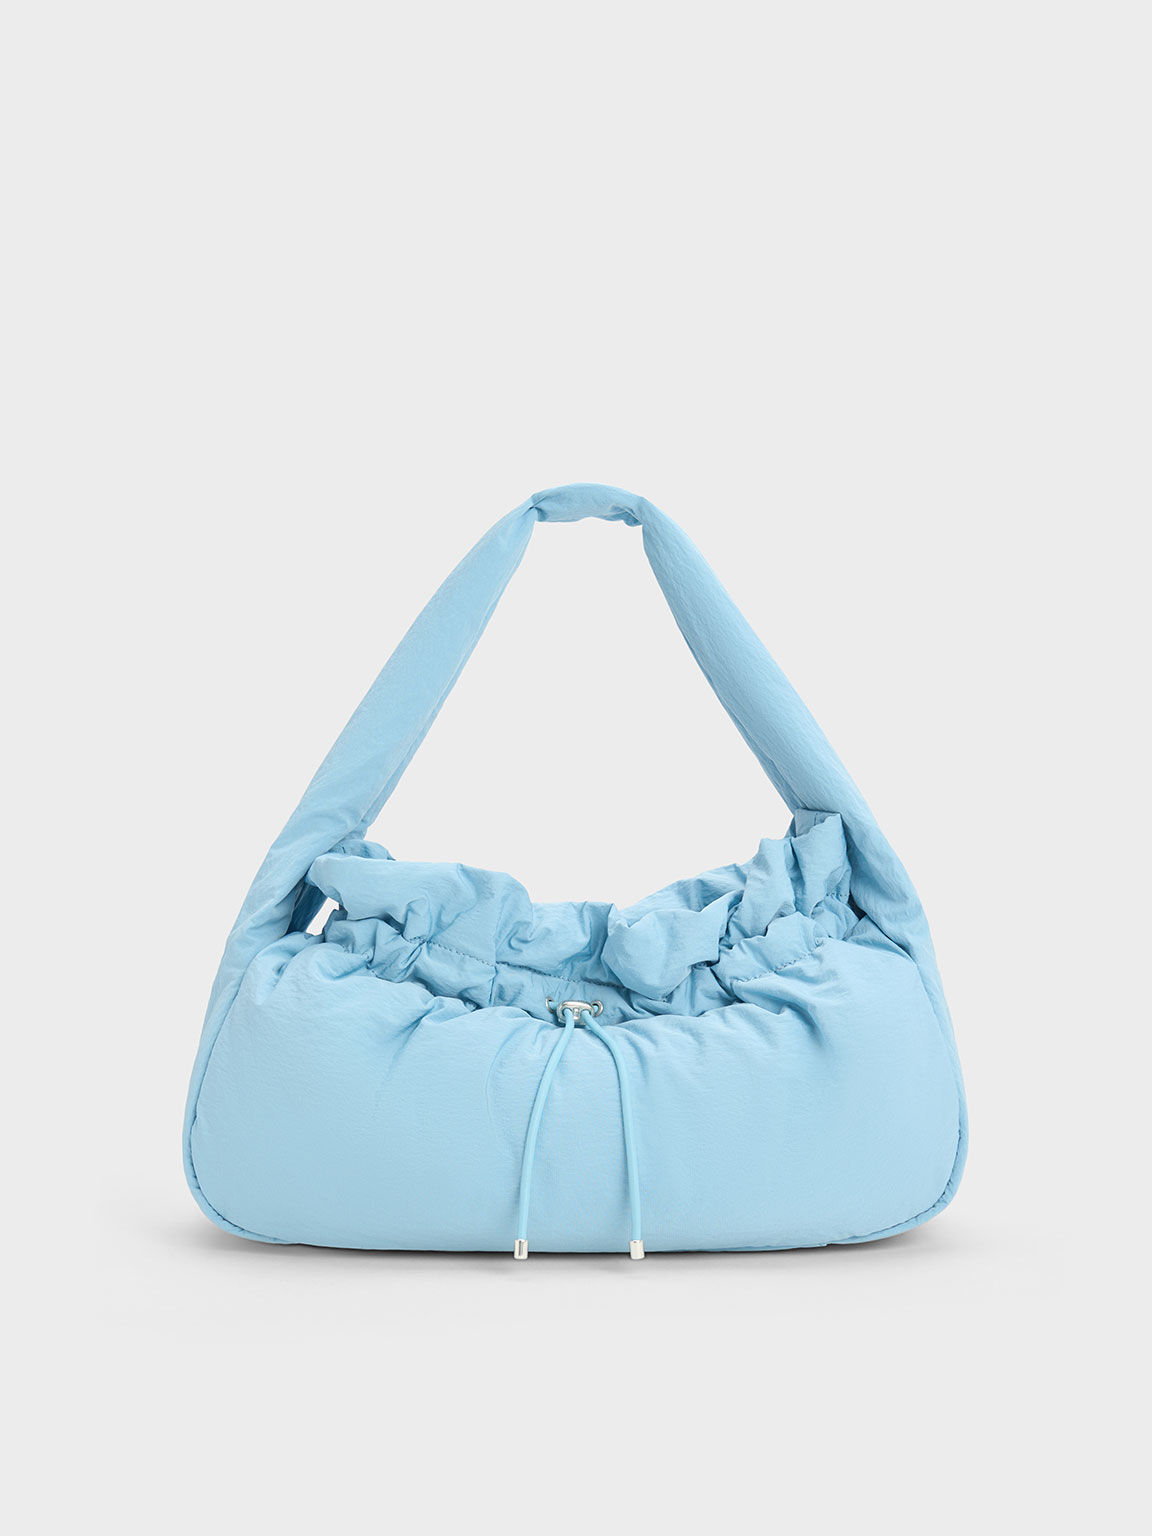 Premium Photo | Women's leather stylish handbag a blue everyday bag in a  woman's hands